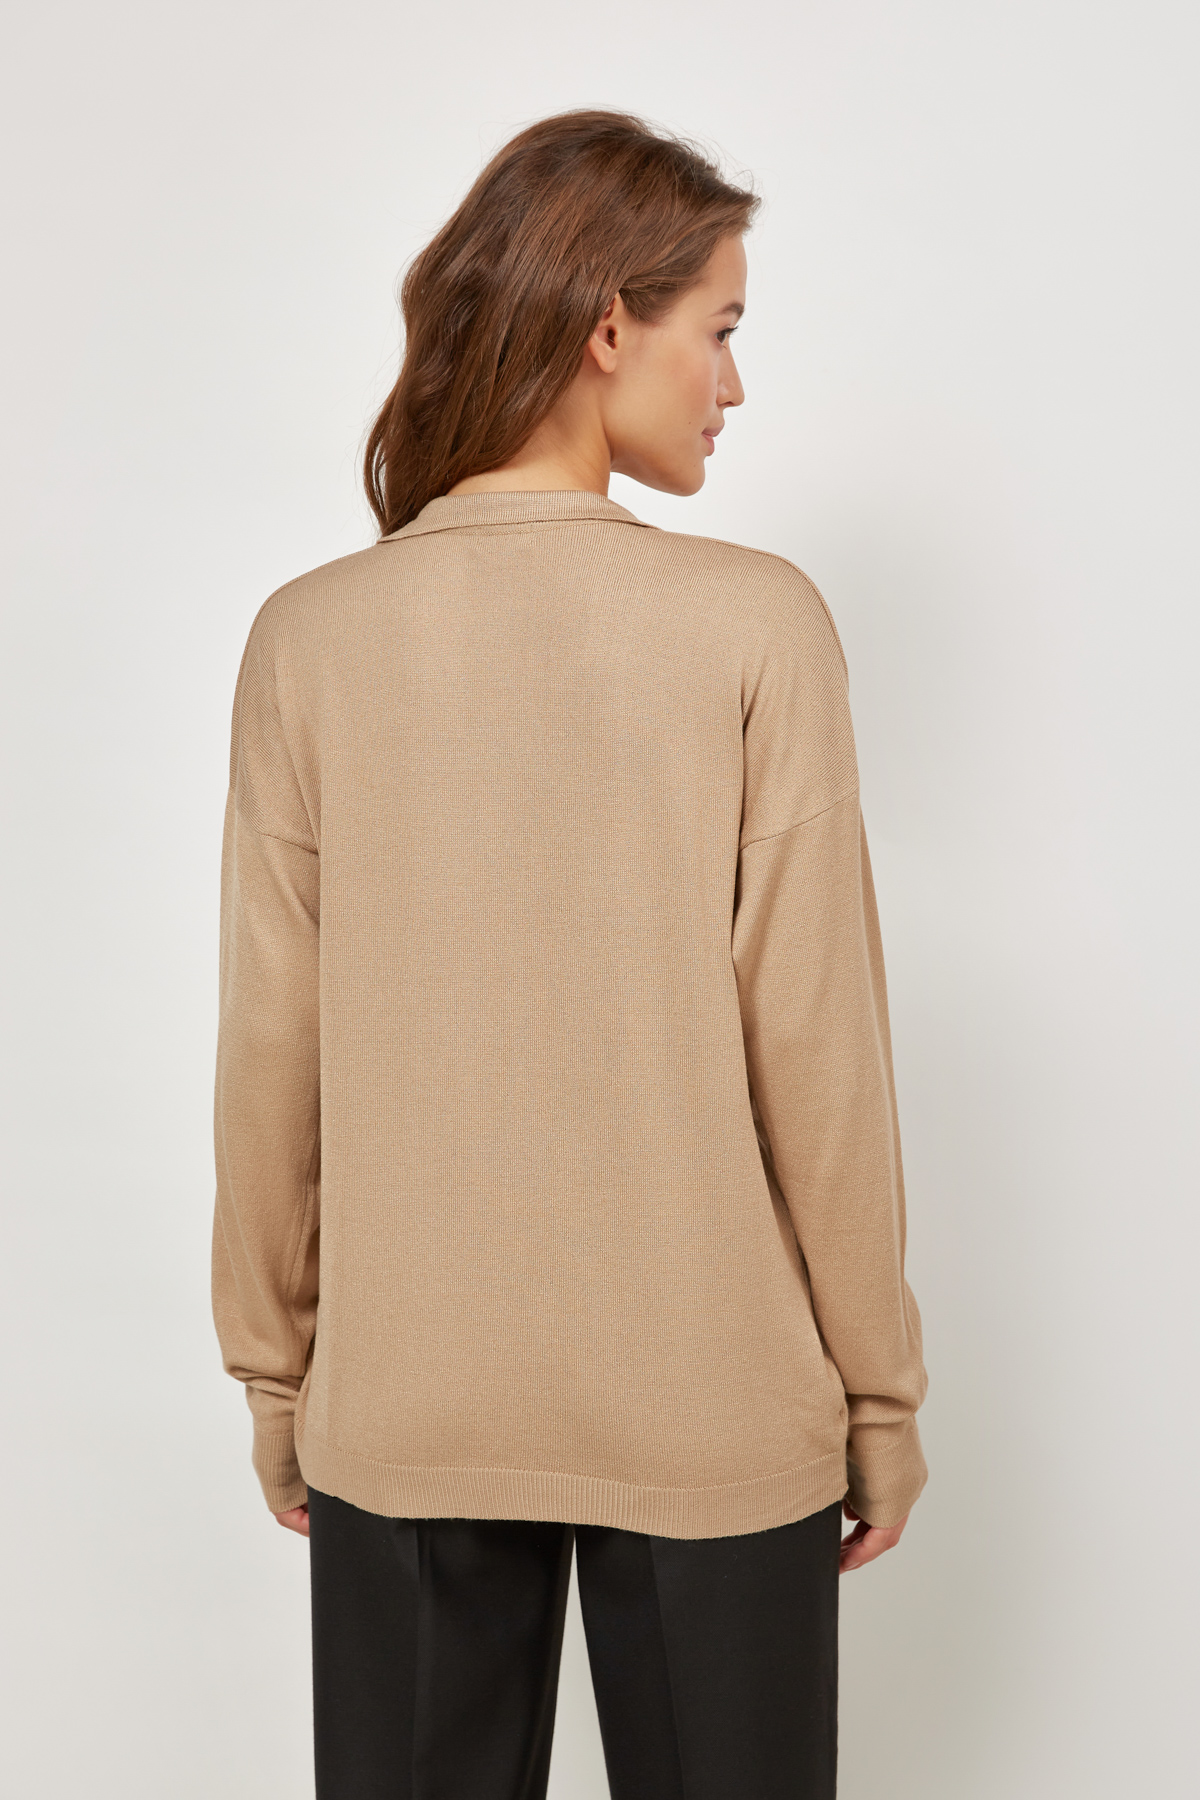 Loose fit beige knitted jumper, photo 5